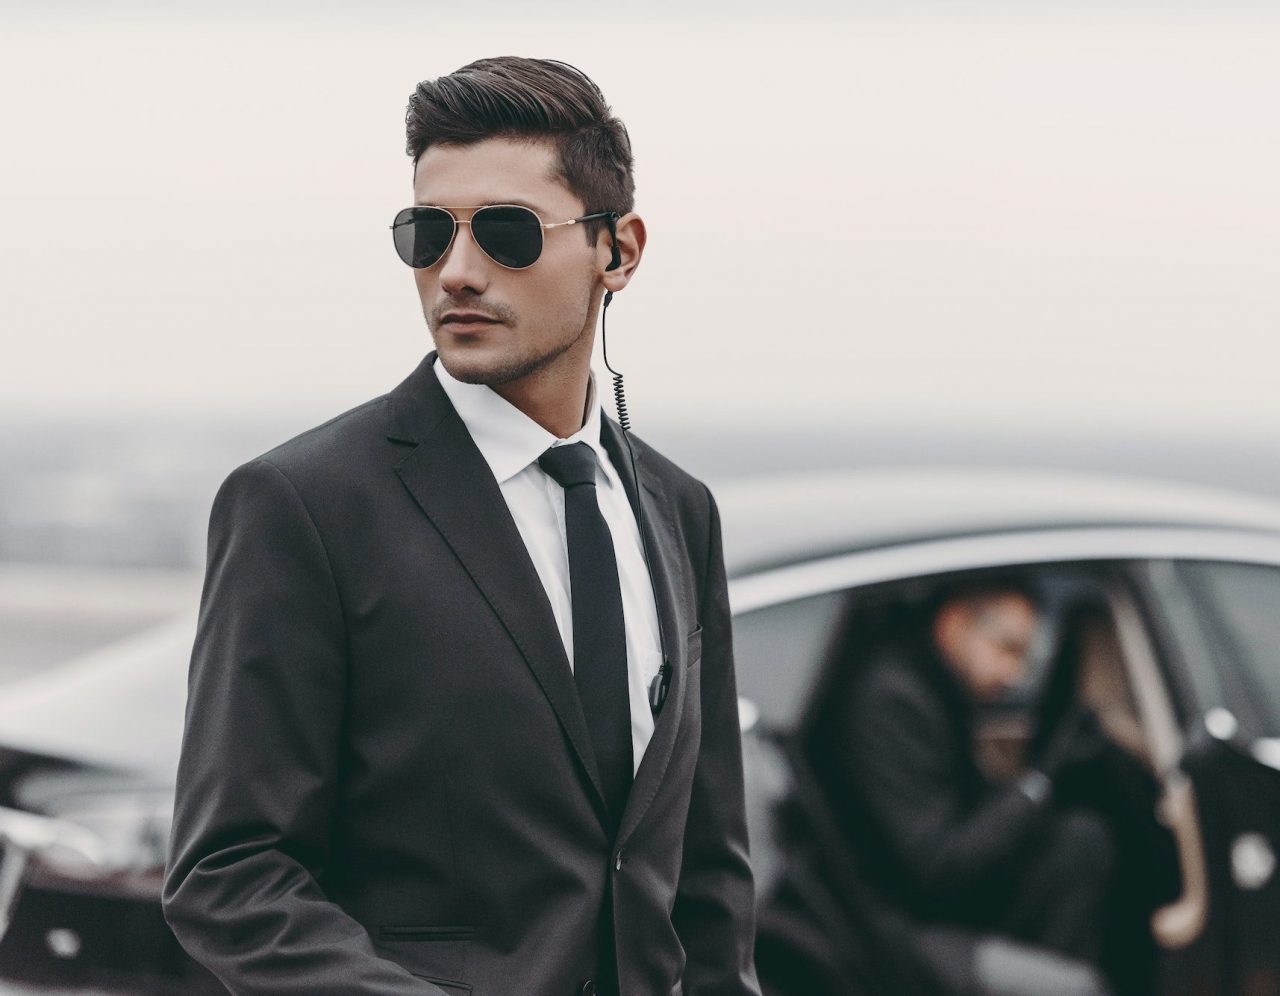 bodyguard reviewing territory while businessman going out from car